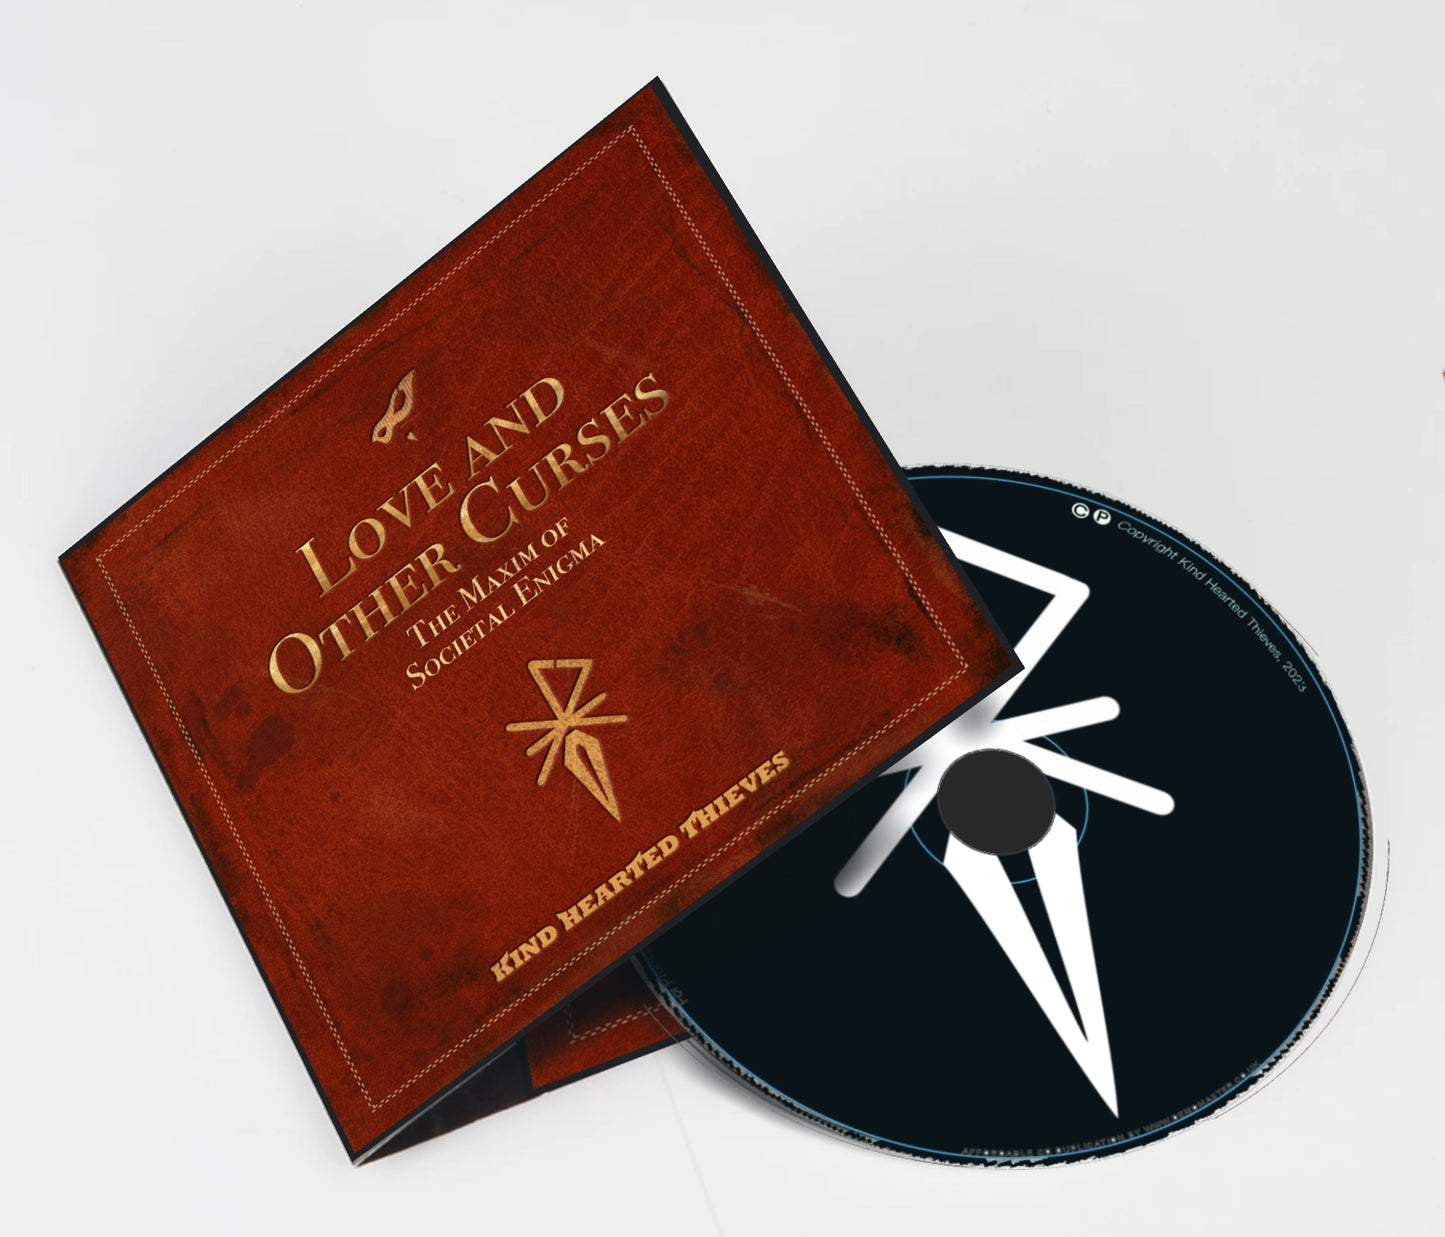 CD Album of 'Love And Other Curses: The Maxim Of Societal Enigma' signed by Jamie Ramsden